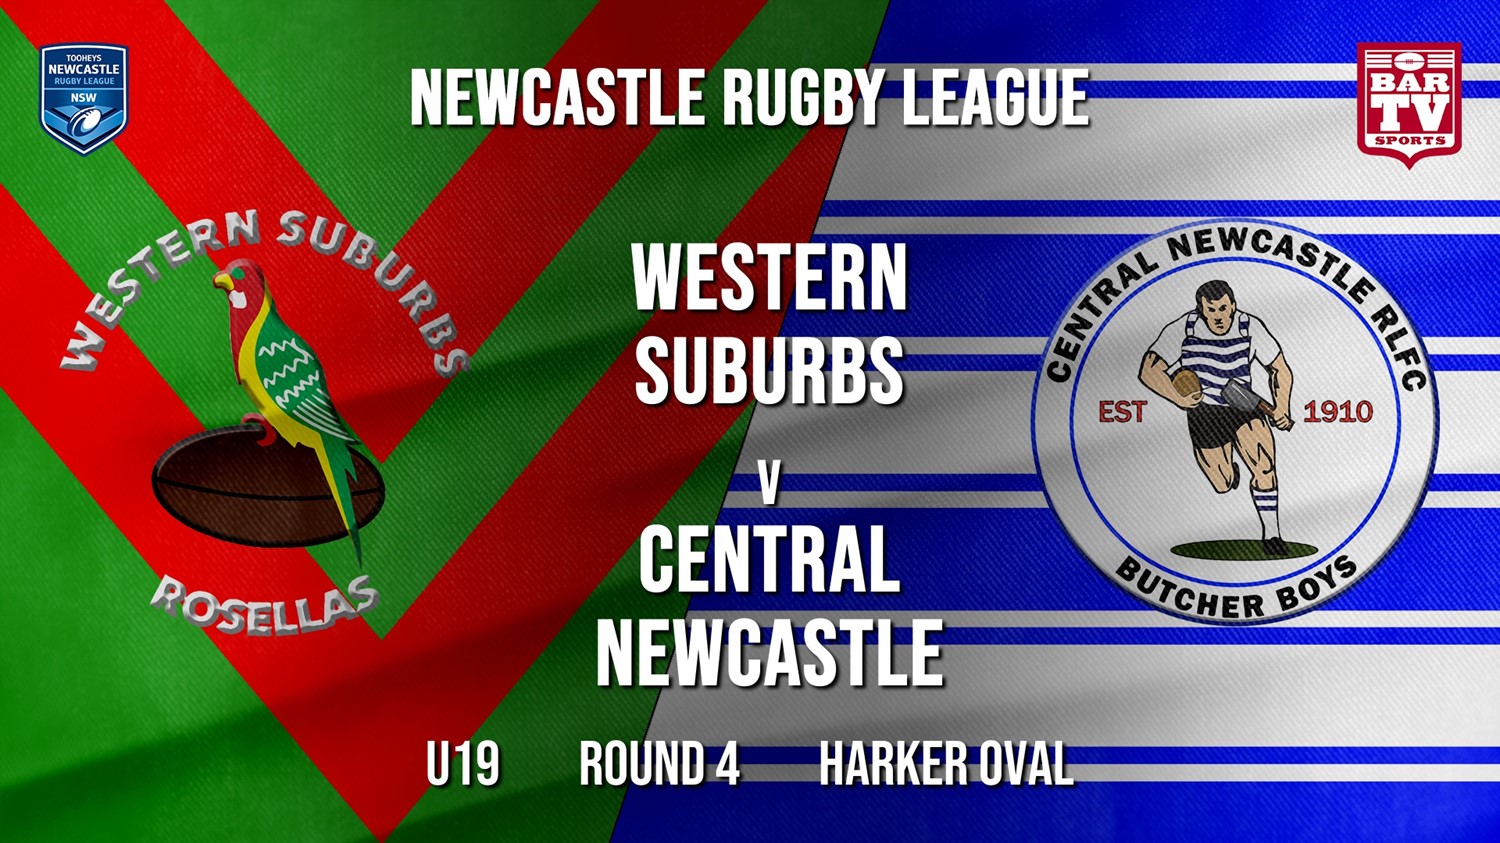 Newcastle Rugby League Round 4 - U19 - Western Suburbs Rosellas v Central Newcastle Slate Image